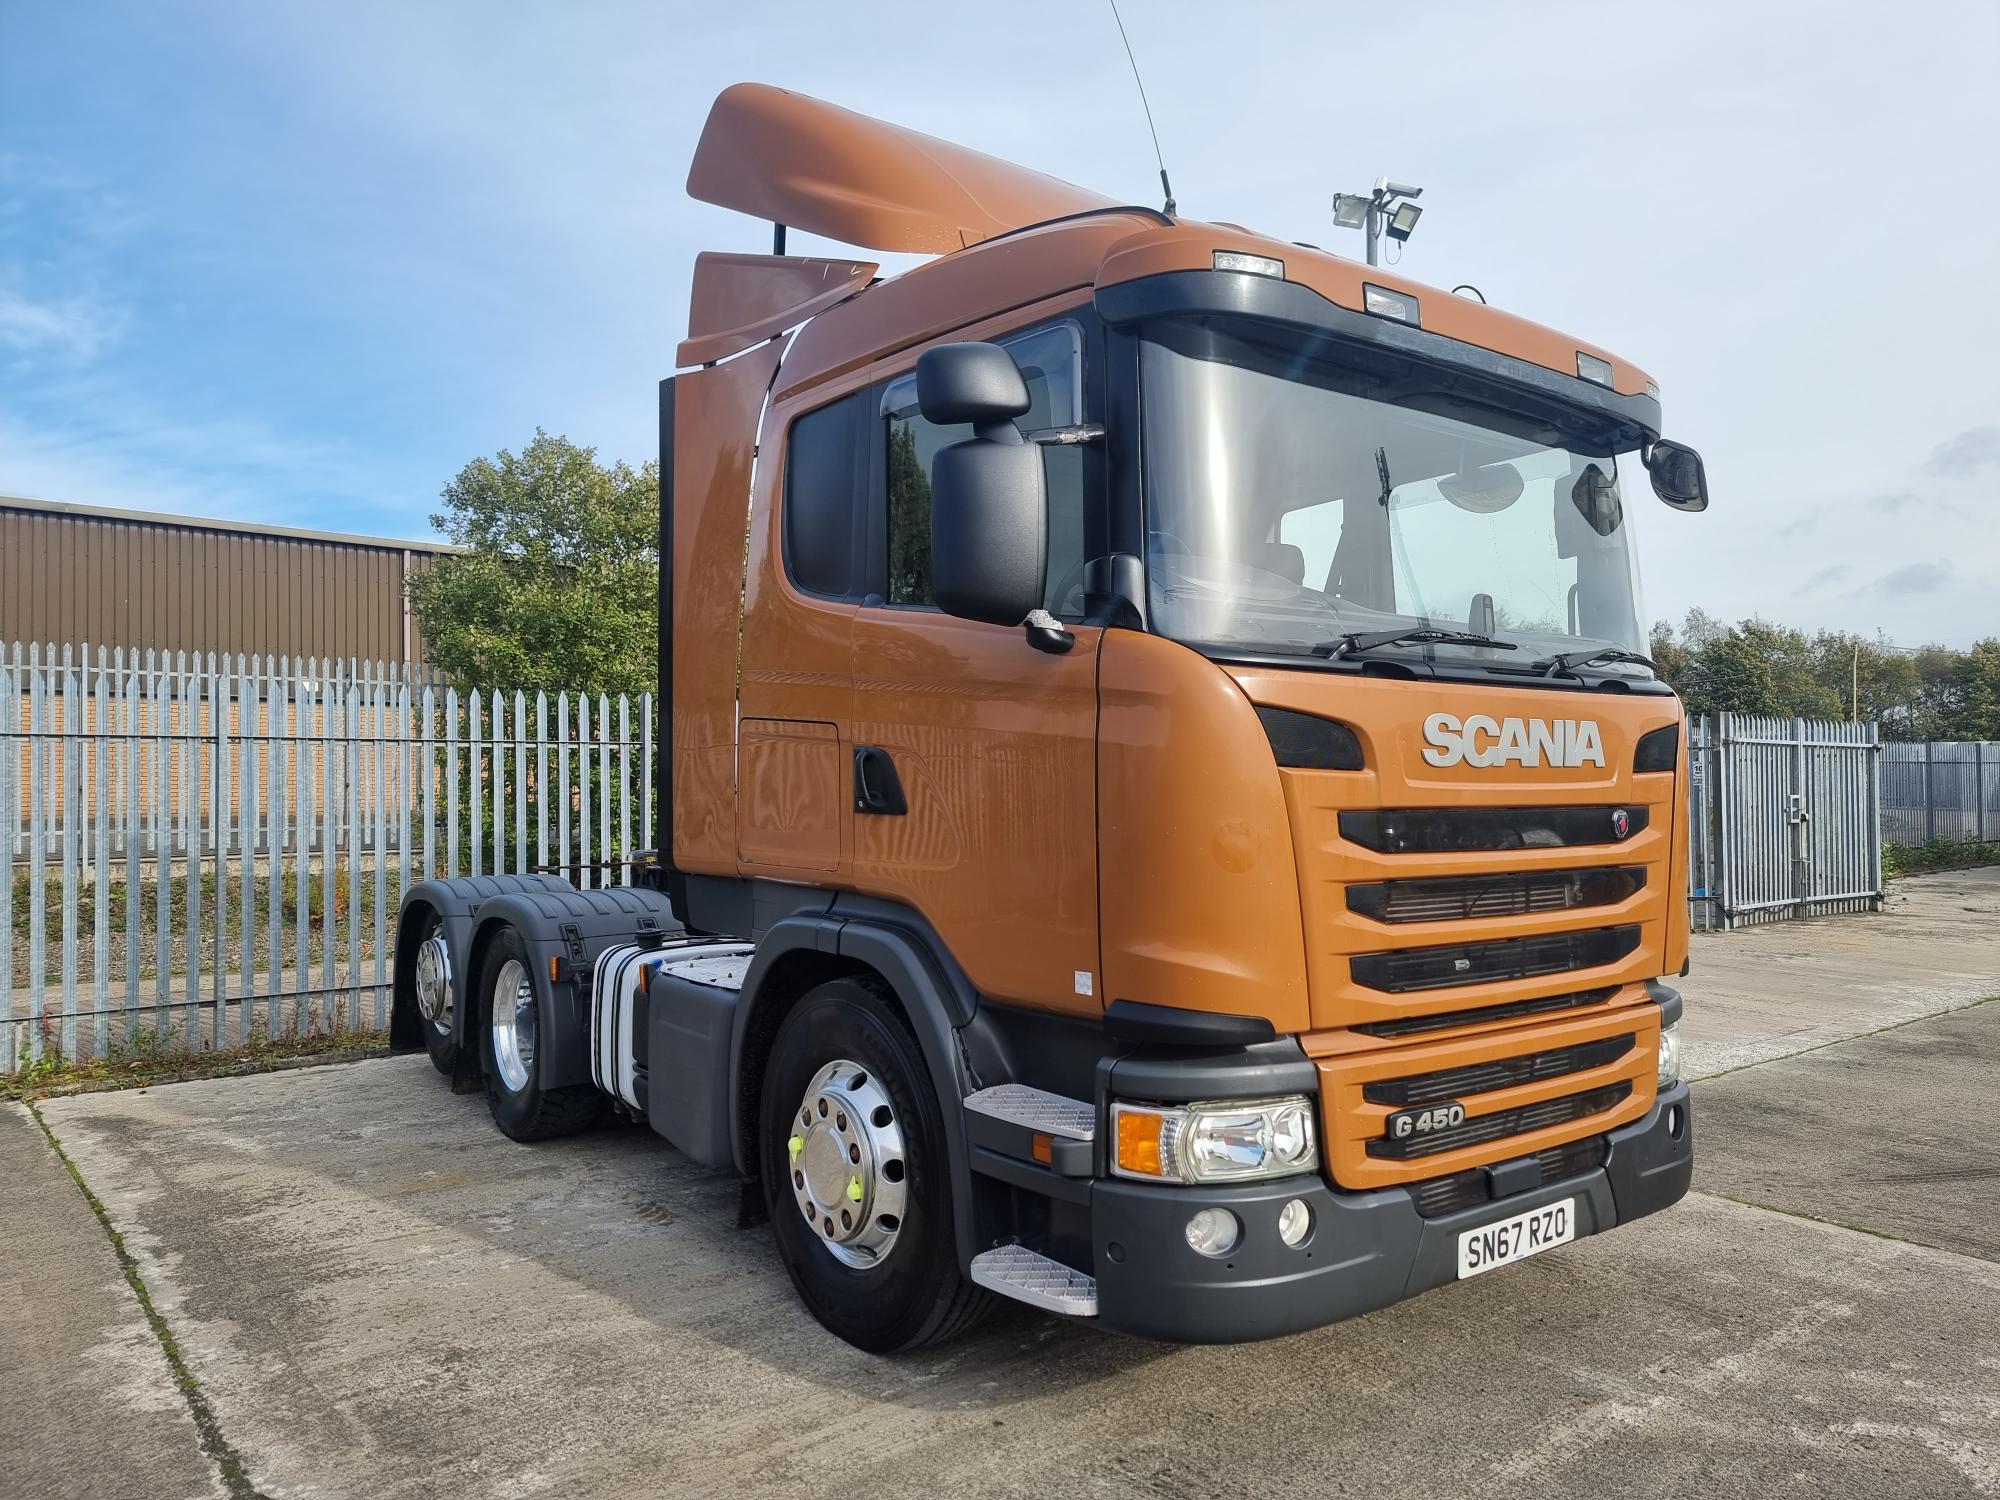 2017 (67) Scania, Euro 6, 450bhp, G Series, Automatic Gearbox, Flat Roof, Tag Axle, PTO Single Line Hydraulics, Fridge, Sat Nav, Heated Seat, Alloy Wheels, Cruise Control, Low Mileage, Finance & Warranty Options Available.